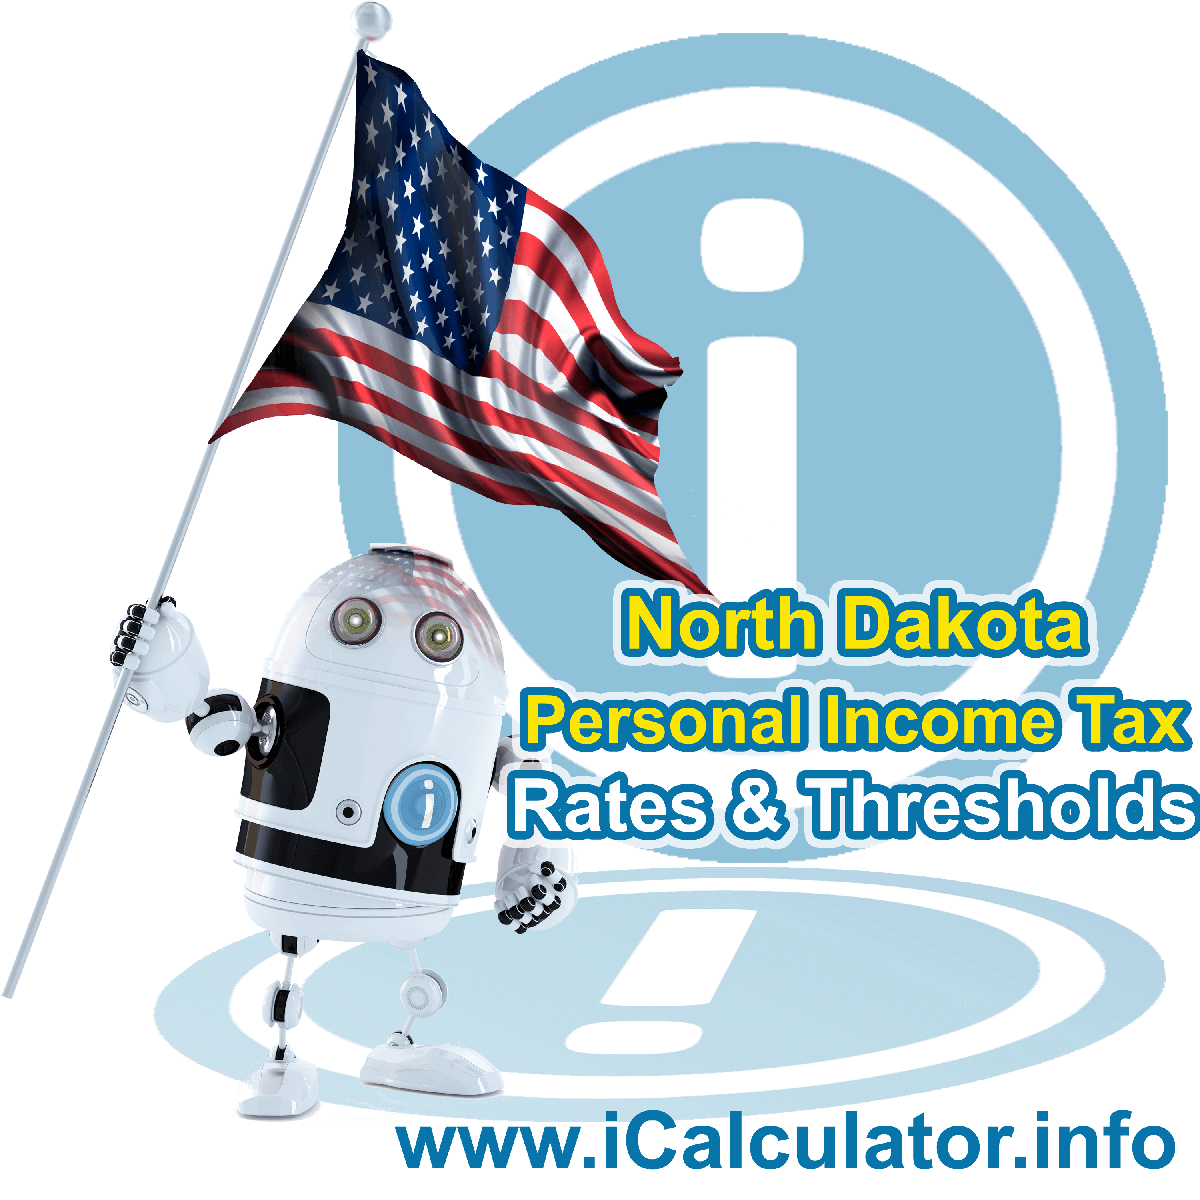 North Dakota State Tax Tables 2014. This image displays details of the North Dakota State Tax Tables for the 2014 tax return year which is provided in support of the 2014 US Tax Calculator